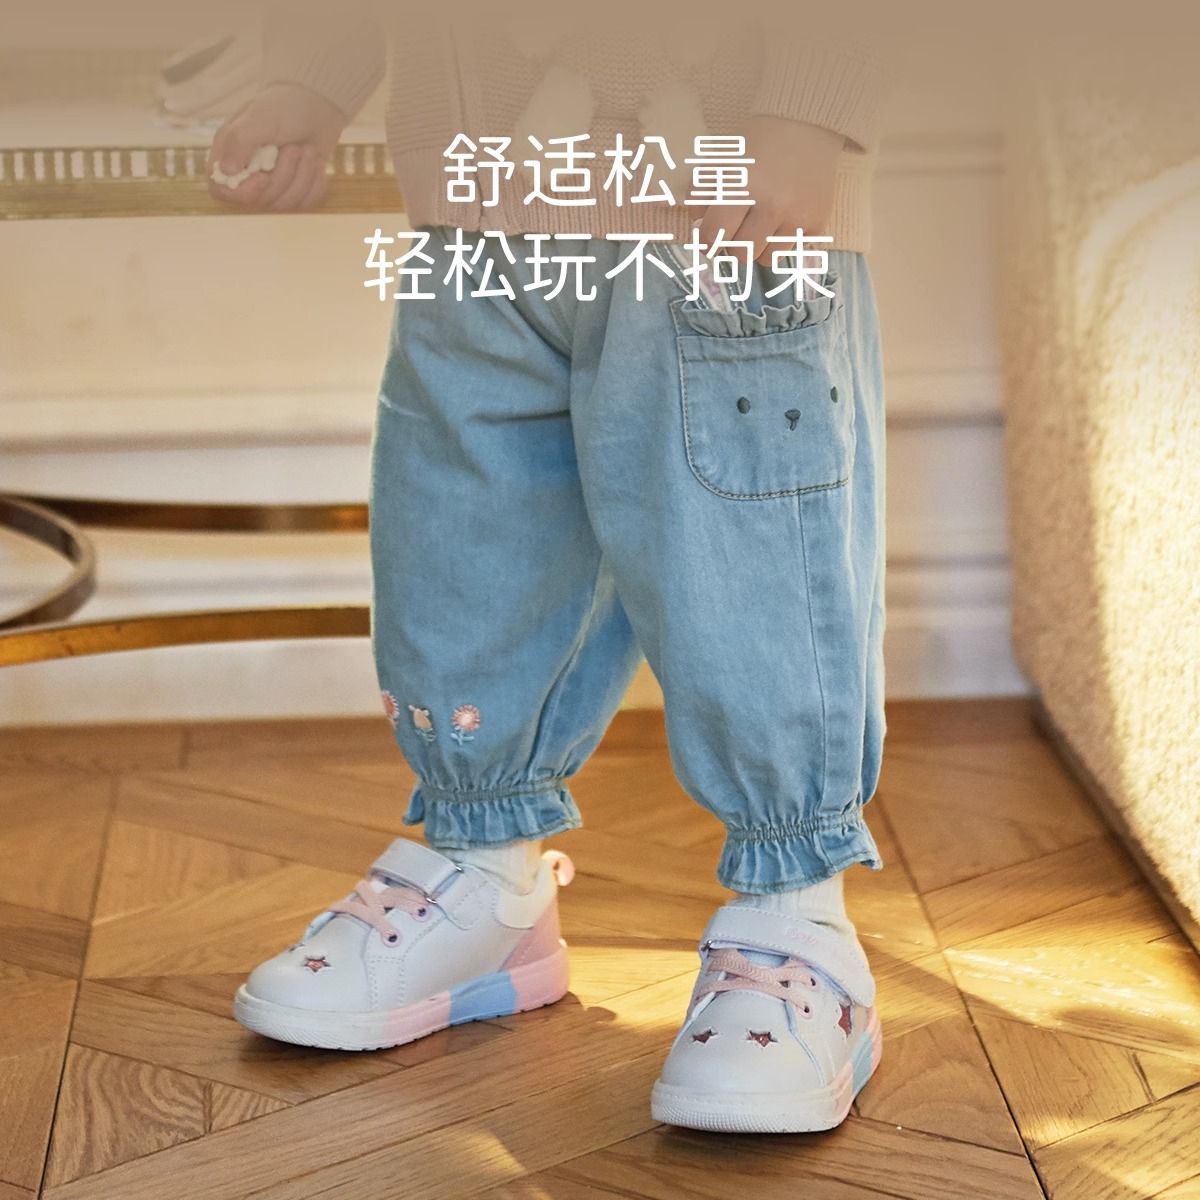 Girls' pure cotton jeans 2023 autumn new style children's fashionable pants girls' casual trousers elastic waist children's clothing